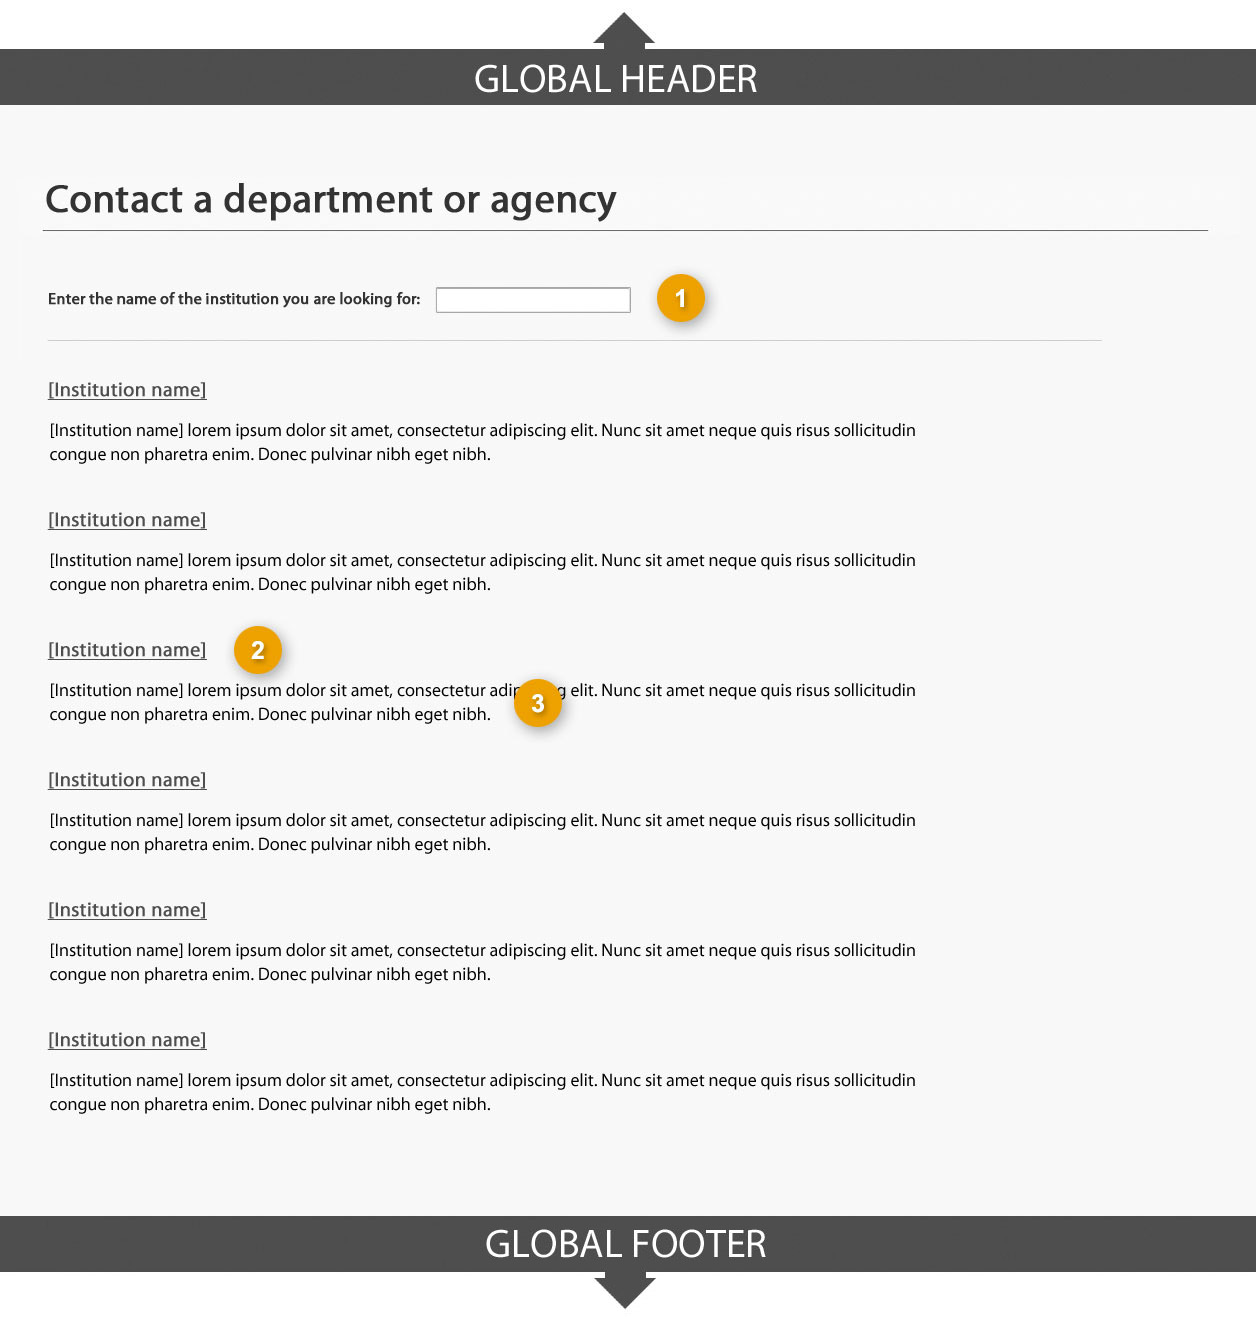 Template of contact a department or agency page showing sections that make up its structure. Read top to bottom and left to right. Specifications detailed below.